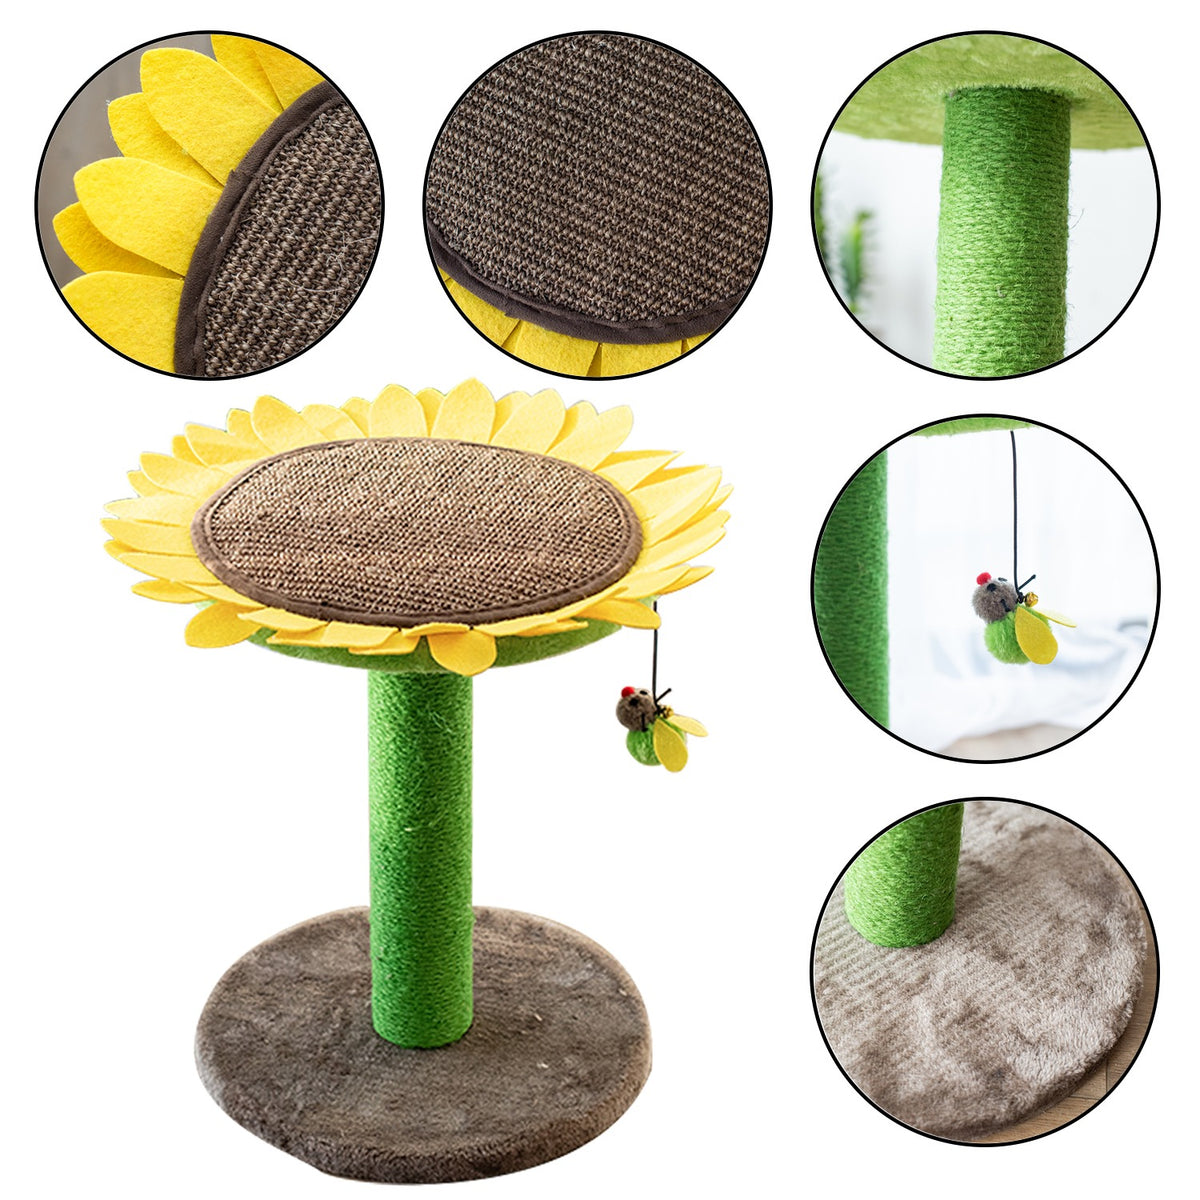 Catry Cat Tree Bed with Sunflower Scratching Post - 3 Red Rovers